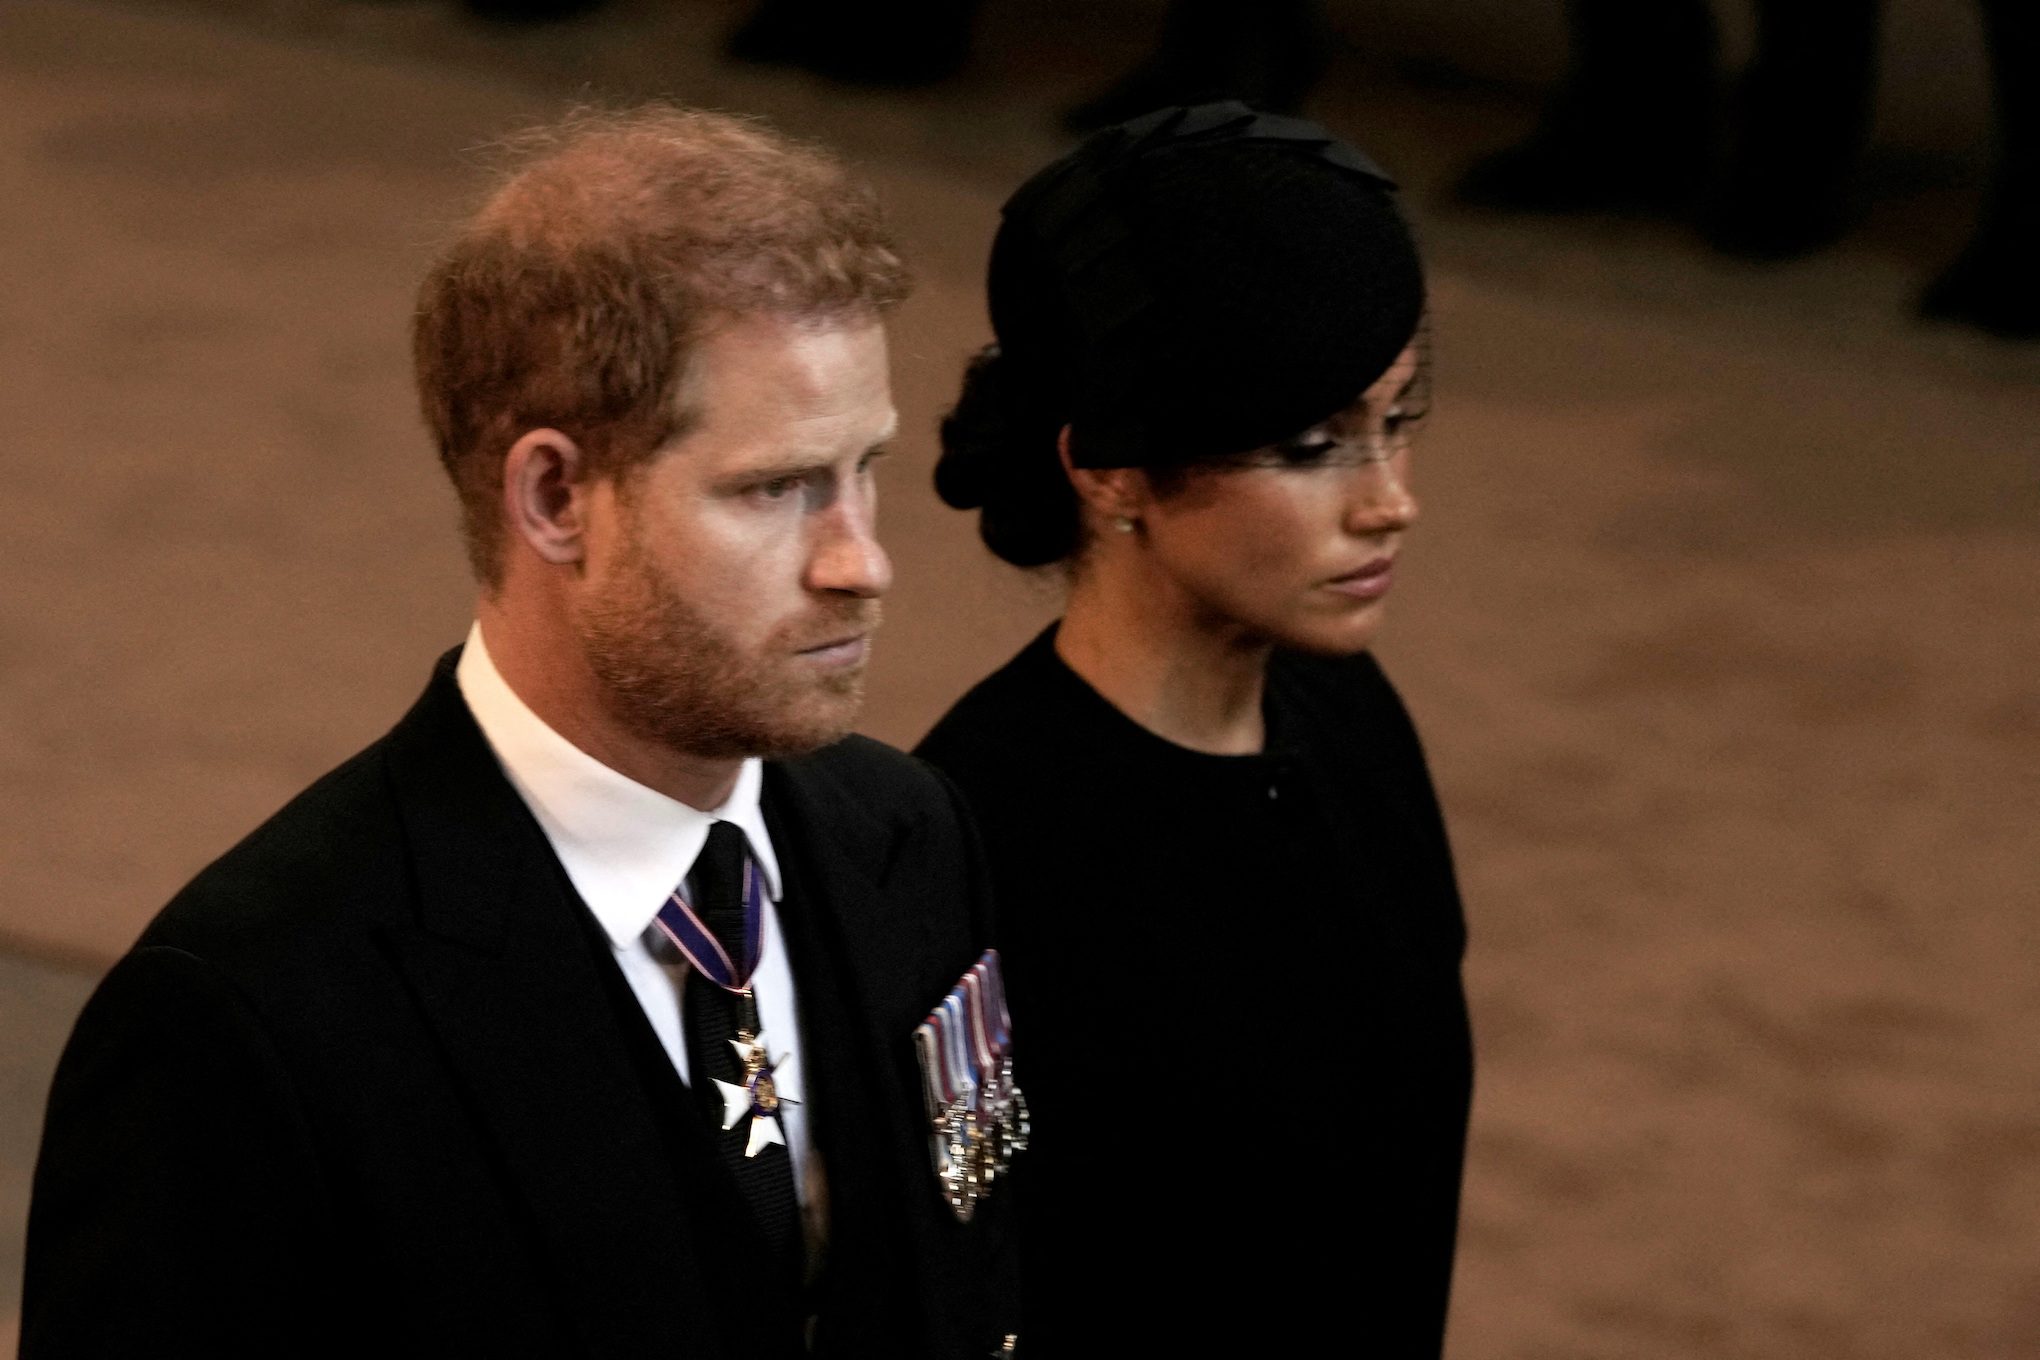 Prince Harry to attend Charles’ coronation; Meghan to stay in California